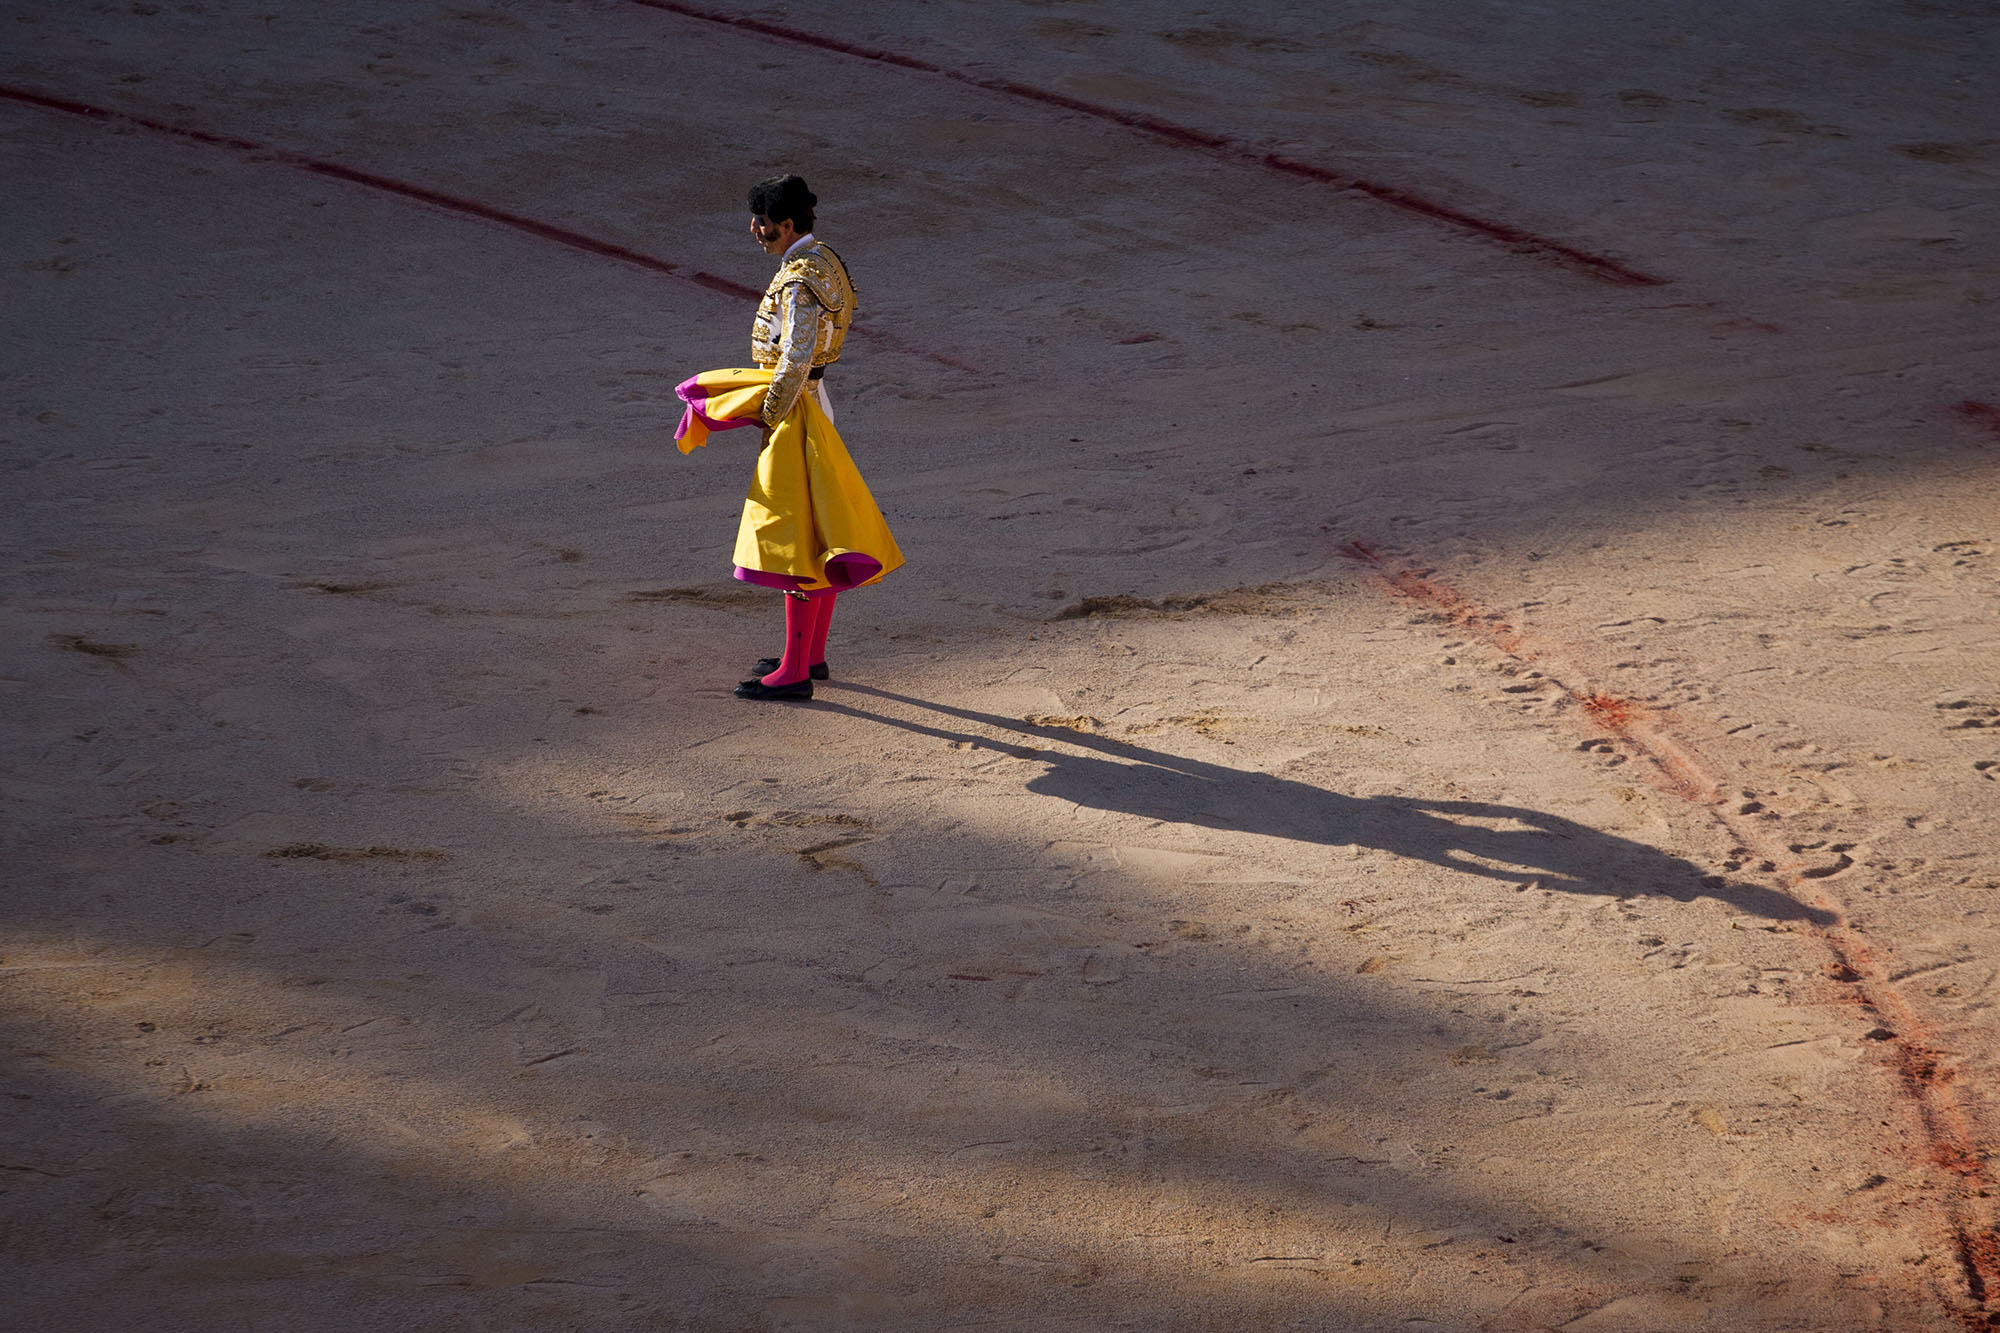 Padilla, a famed bullfighter who once lost an eye to a horn, stands alone as the sombra section of the bullring grows. He sports the suit of lights but also the cape used by the aides-he's performing the entire bullfight on his own.